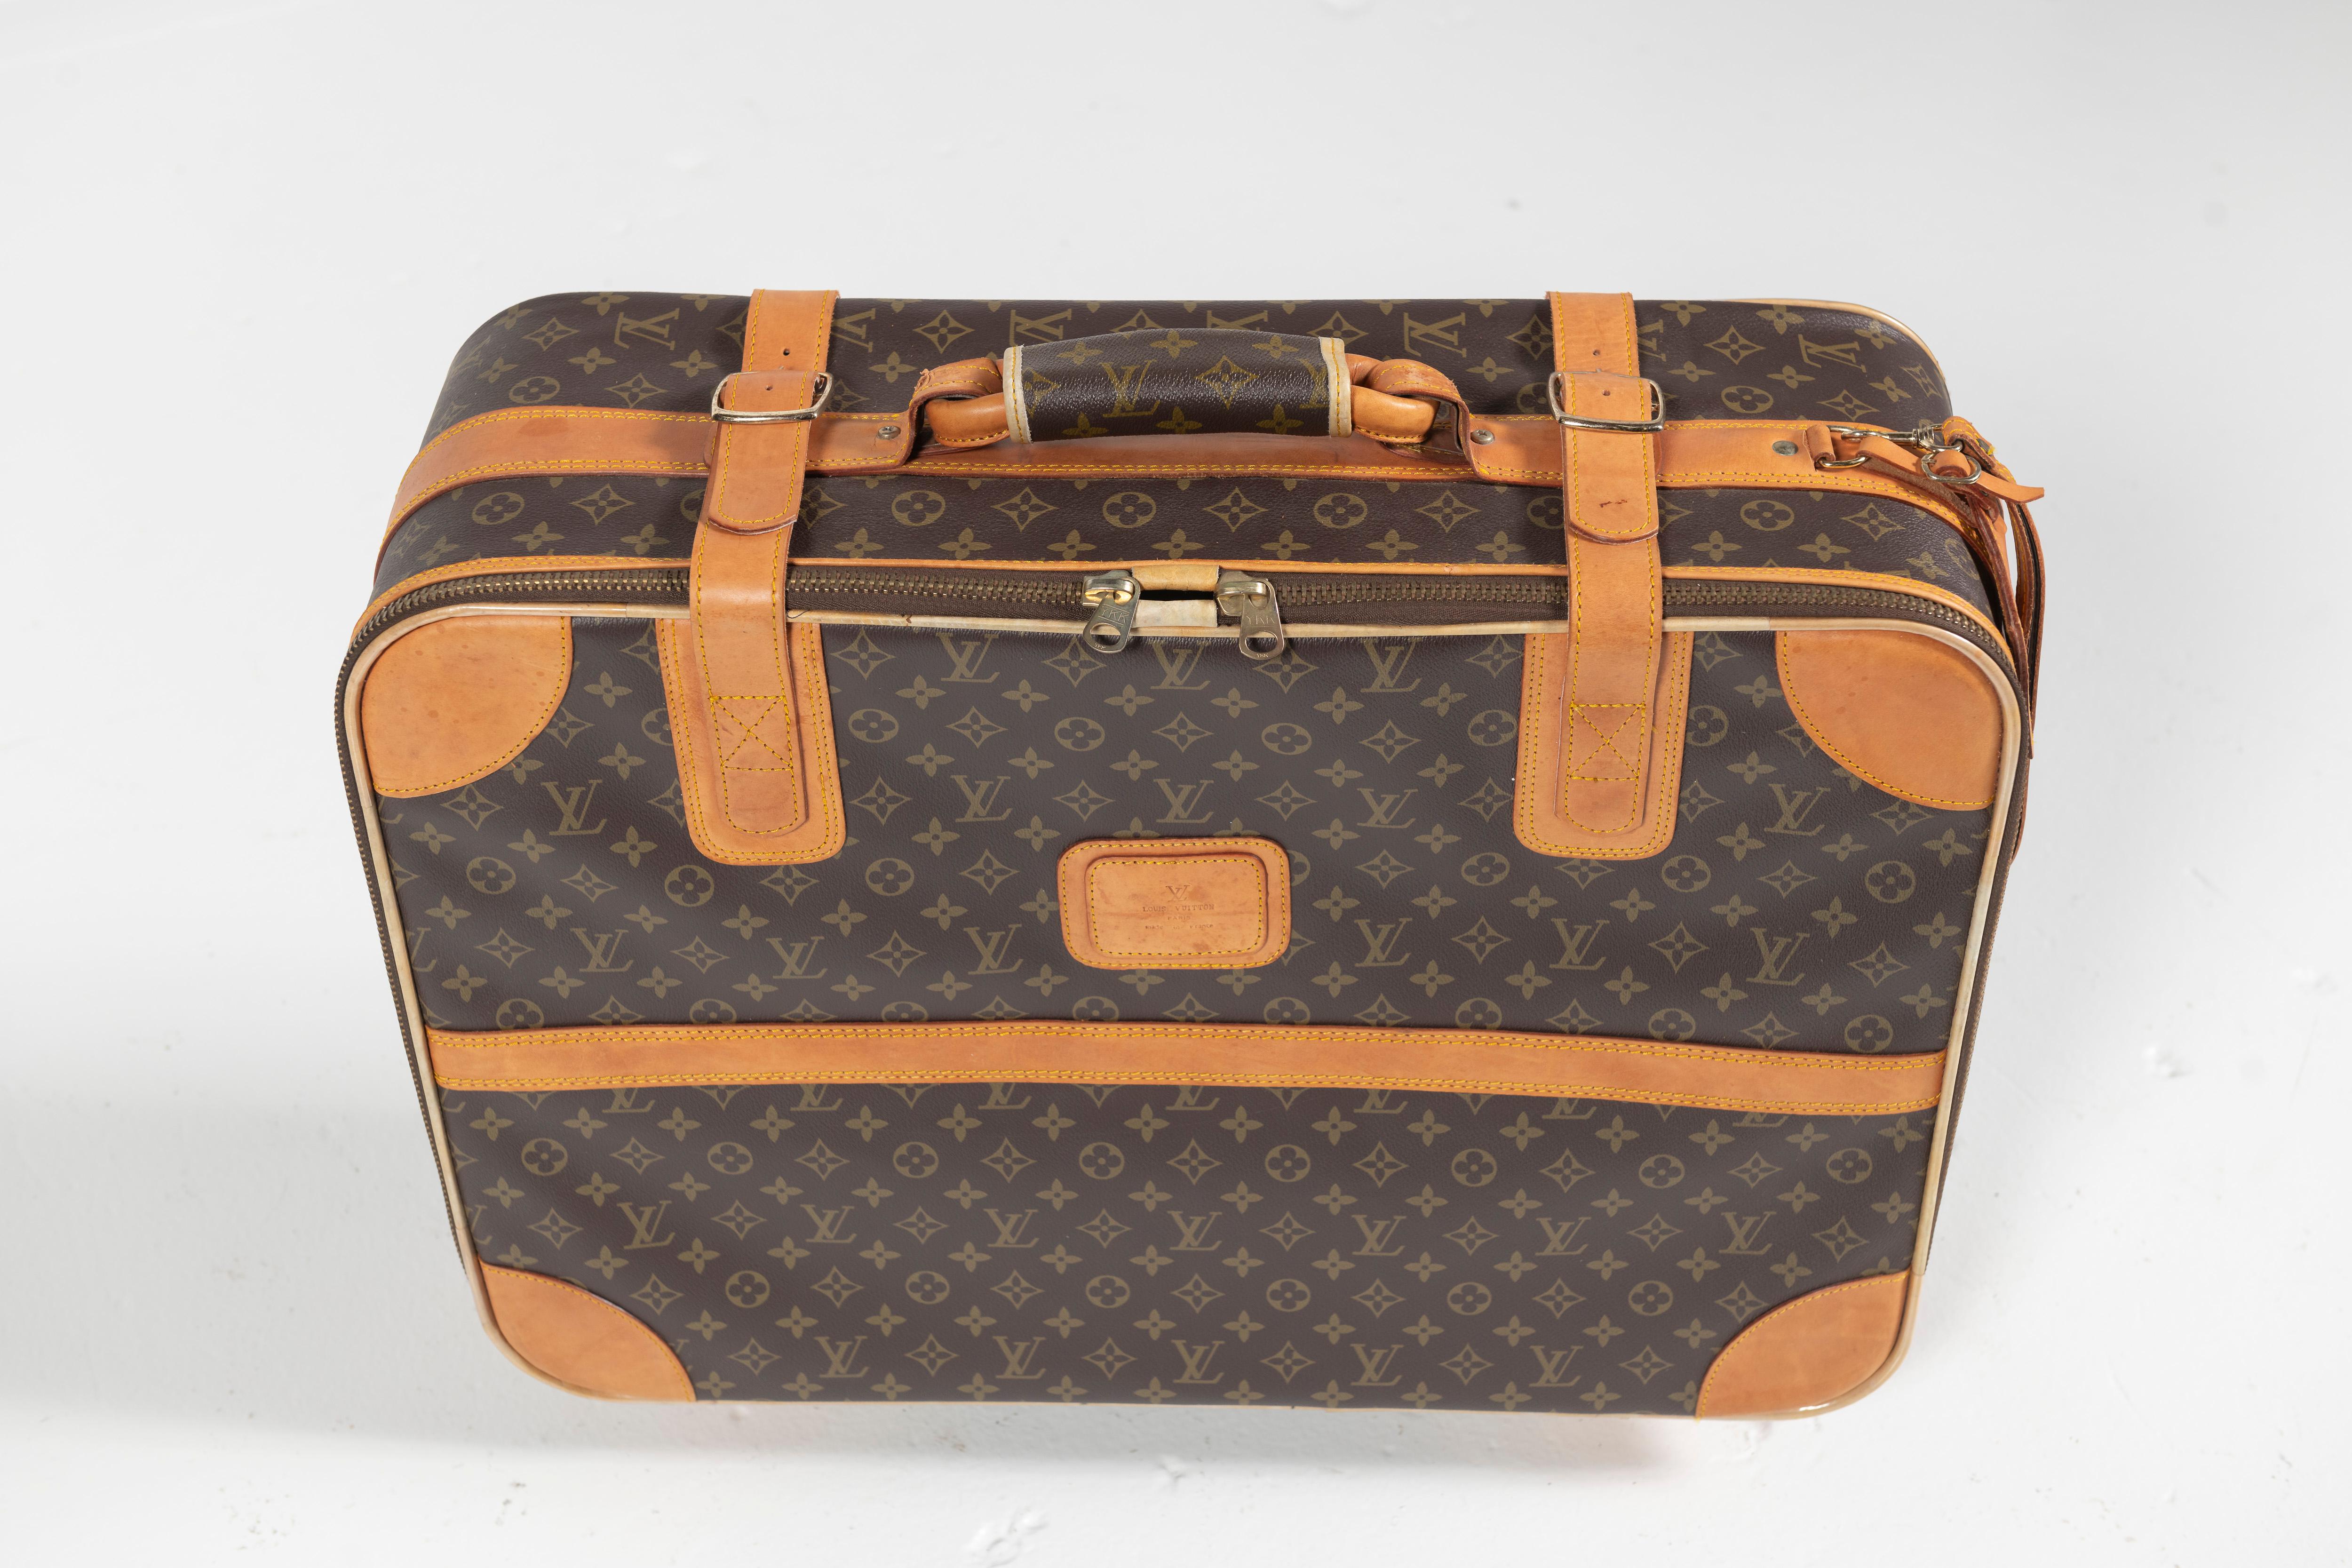 Vintage Louis Vuitton Suitcase, Monogrammed Coated Canvas, Small-Sized For Sale 2